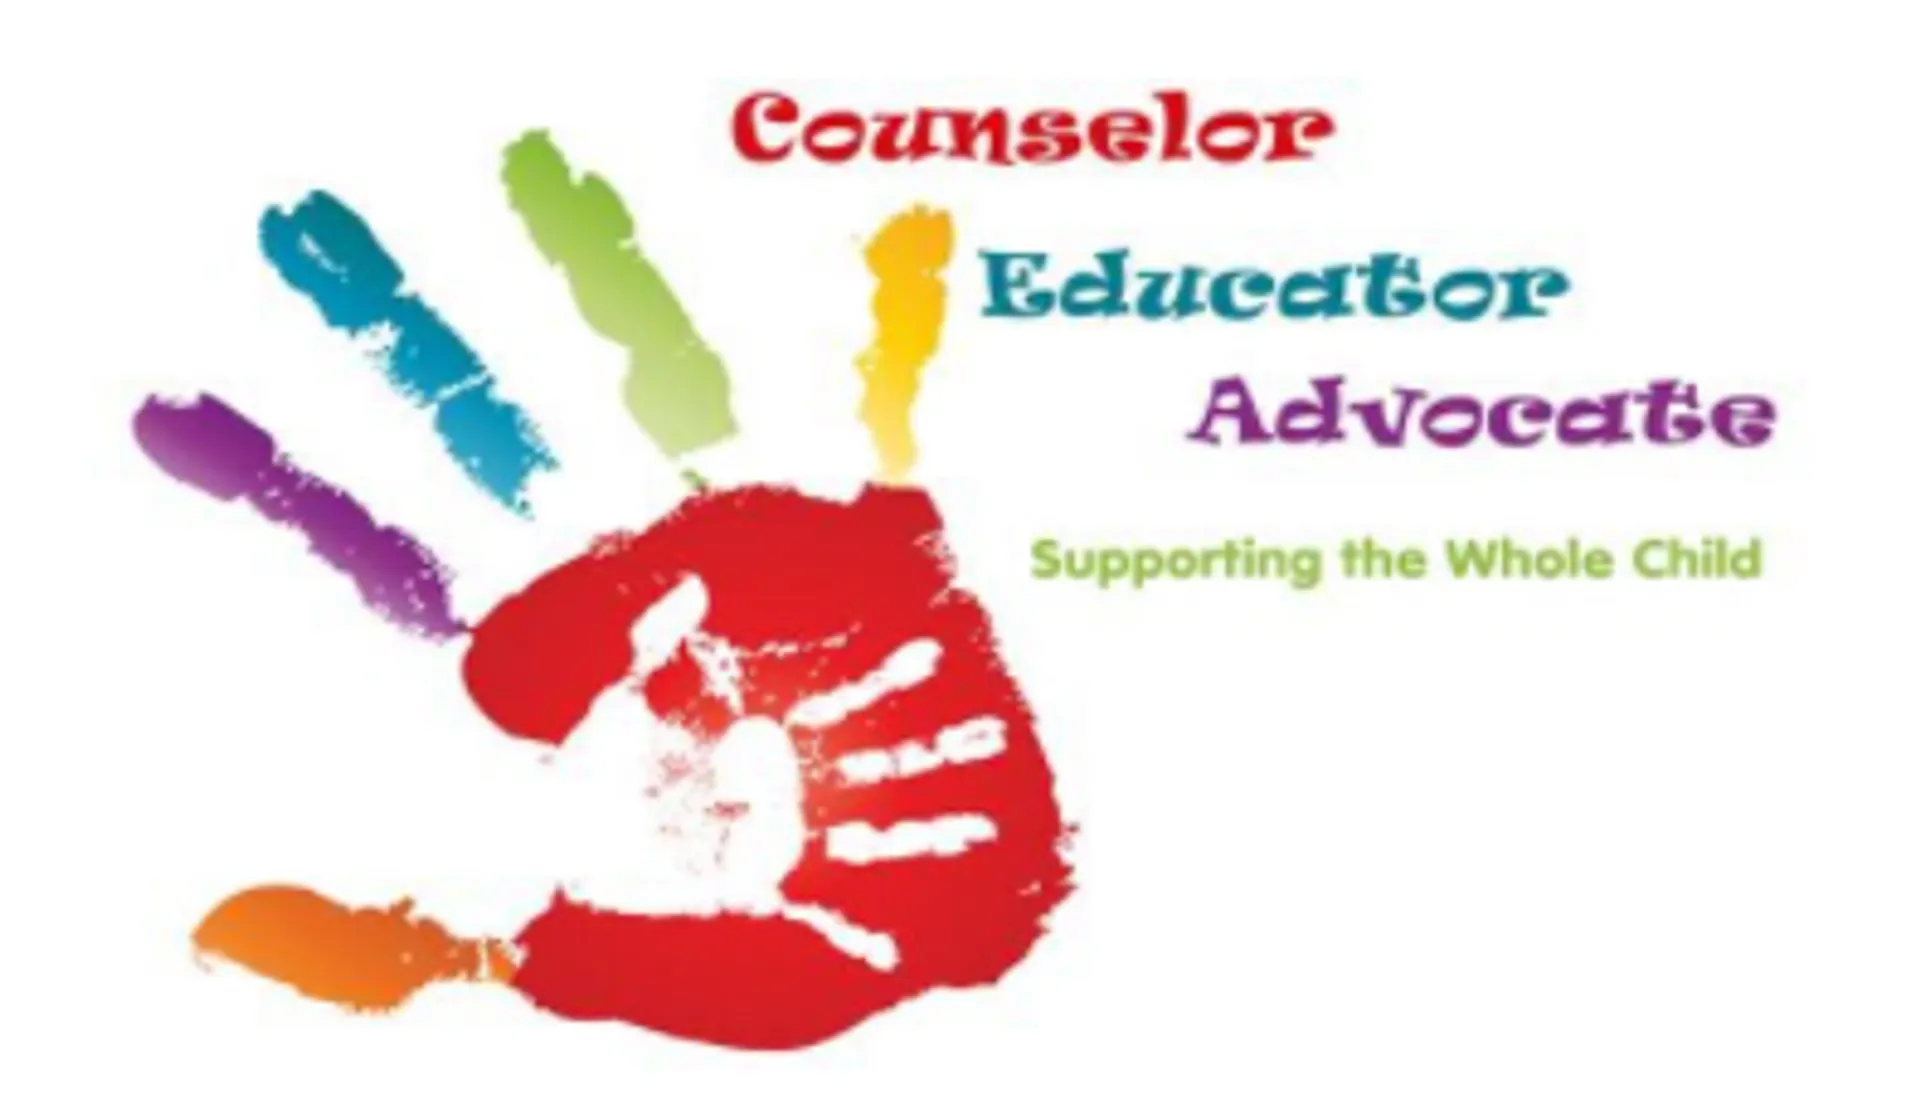 Counseling & Guidance / Report Bullying